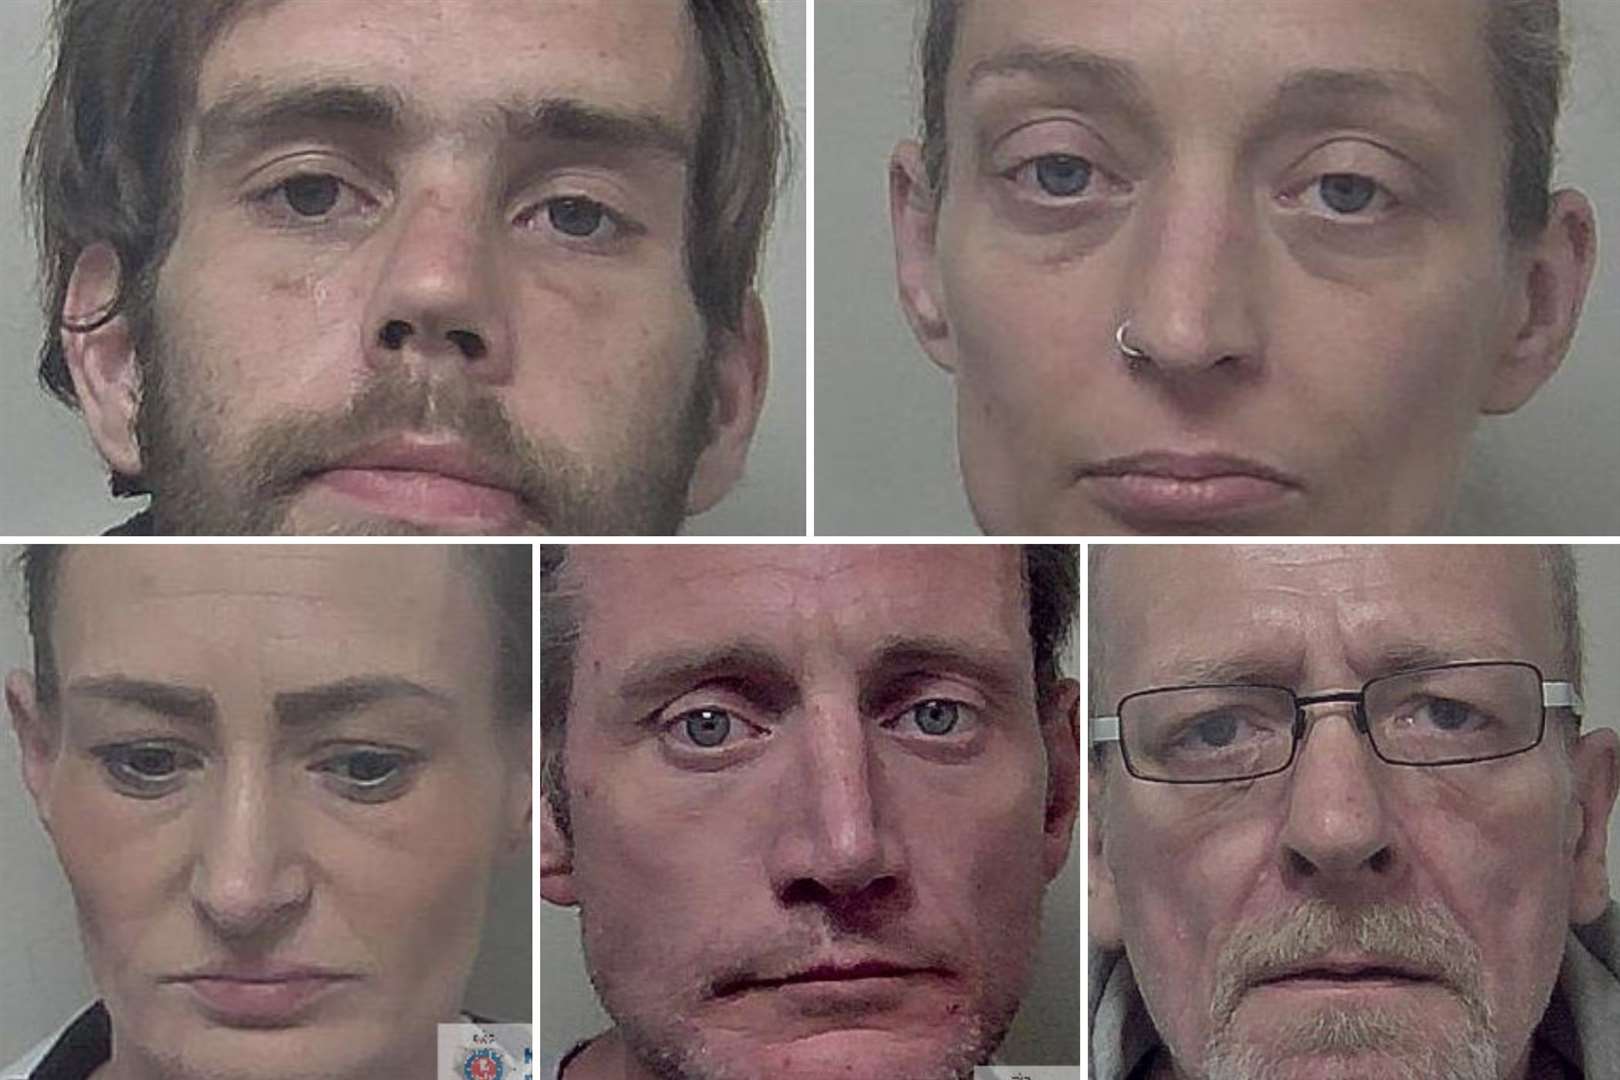 Clockwise from top left: Christopher Charlton, Samantha McKeown, James Martin, Jonathan Norman and Zena Watts were jailed in December 2020